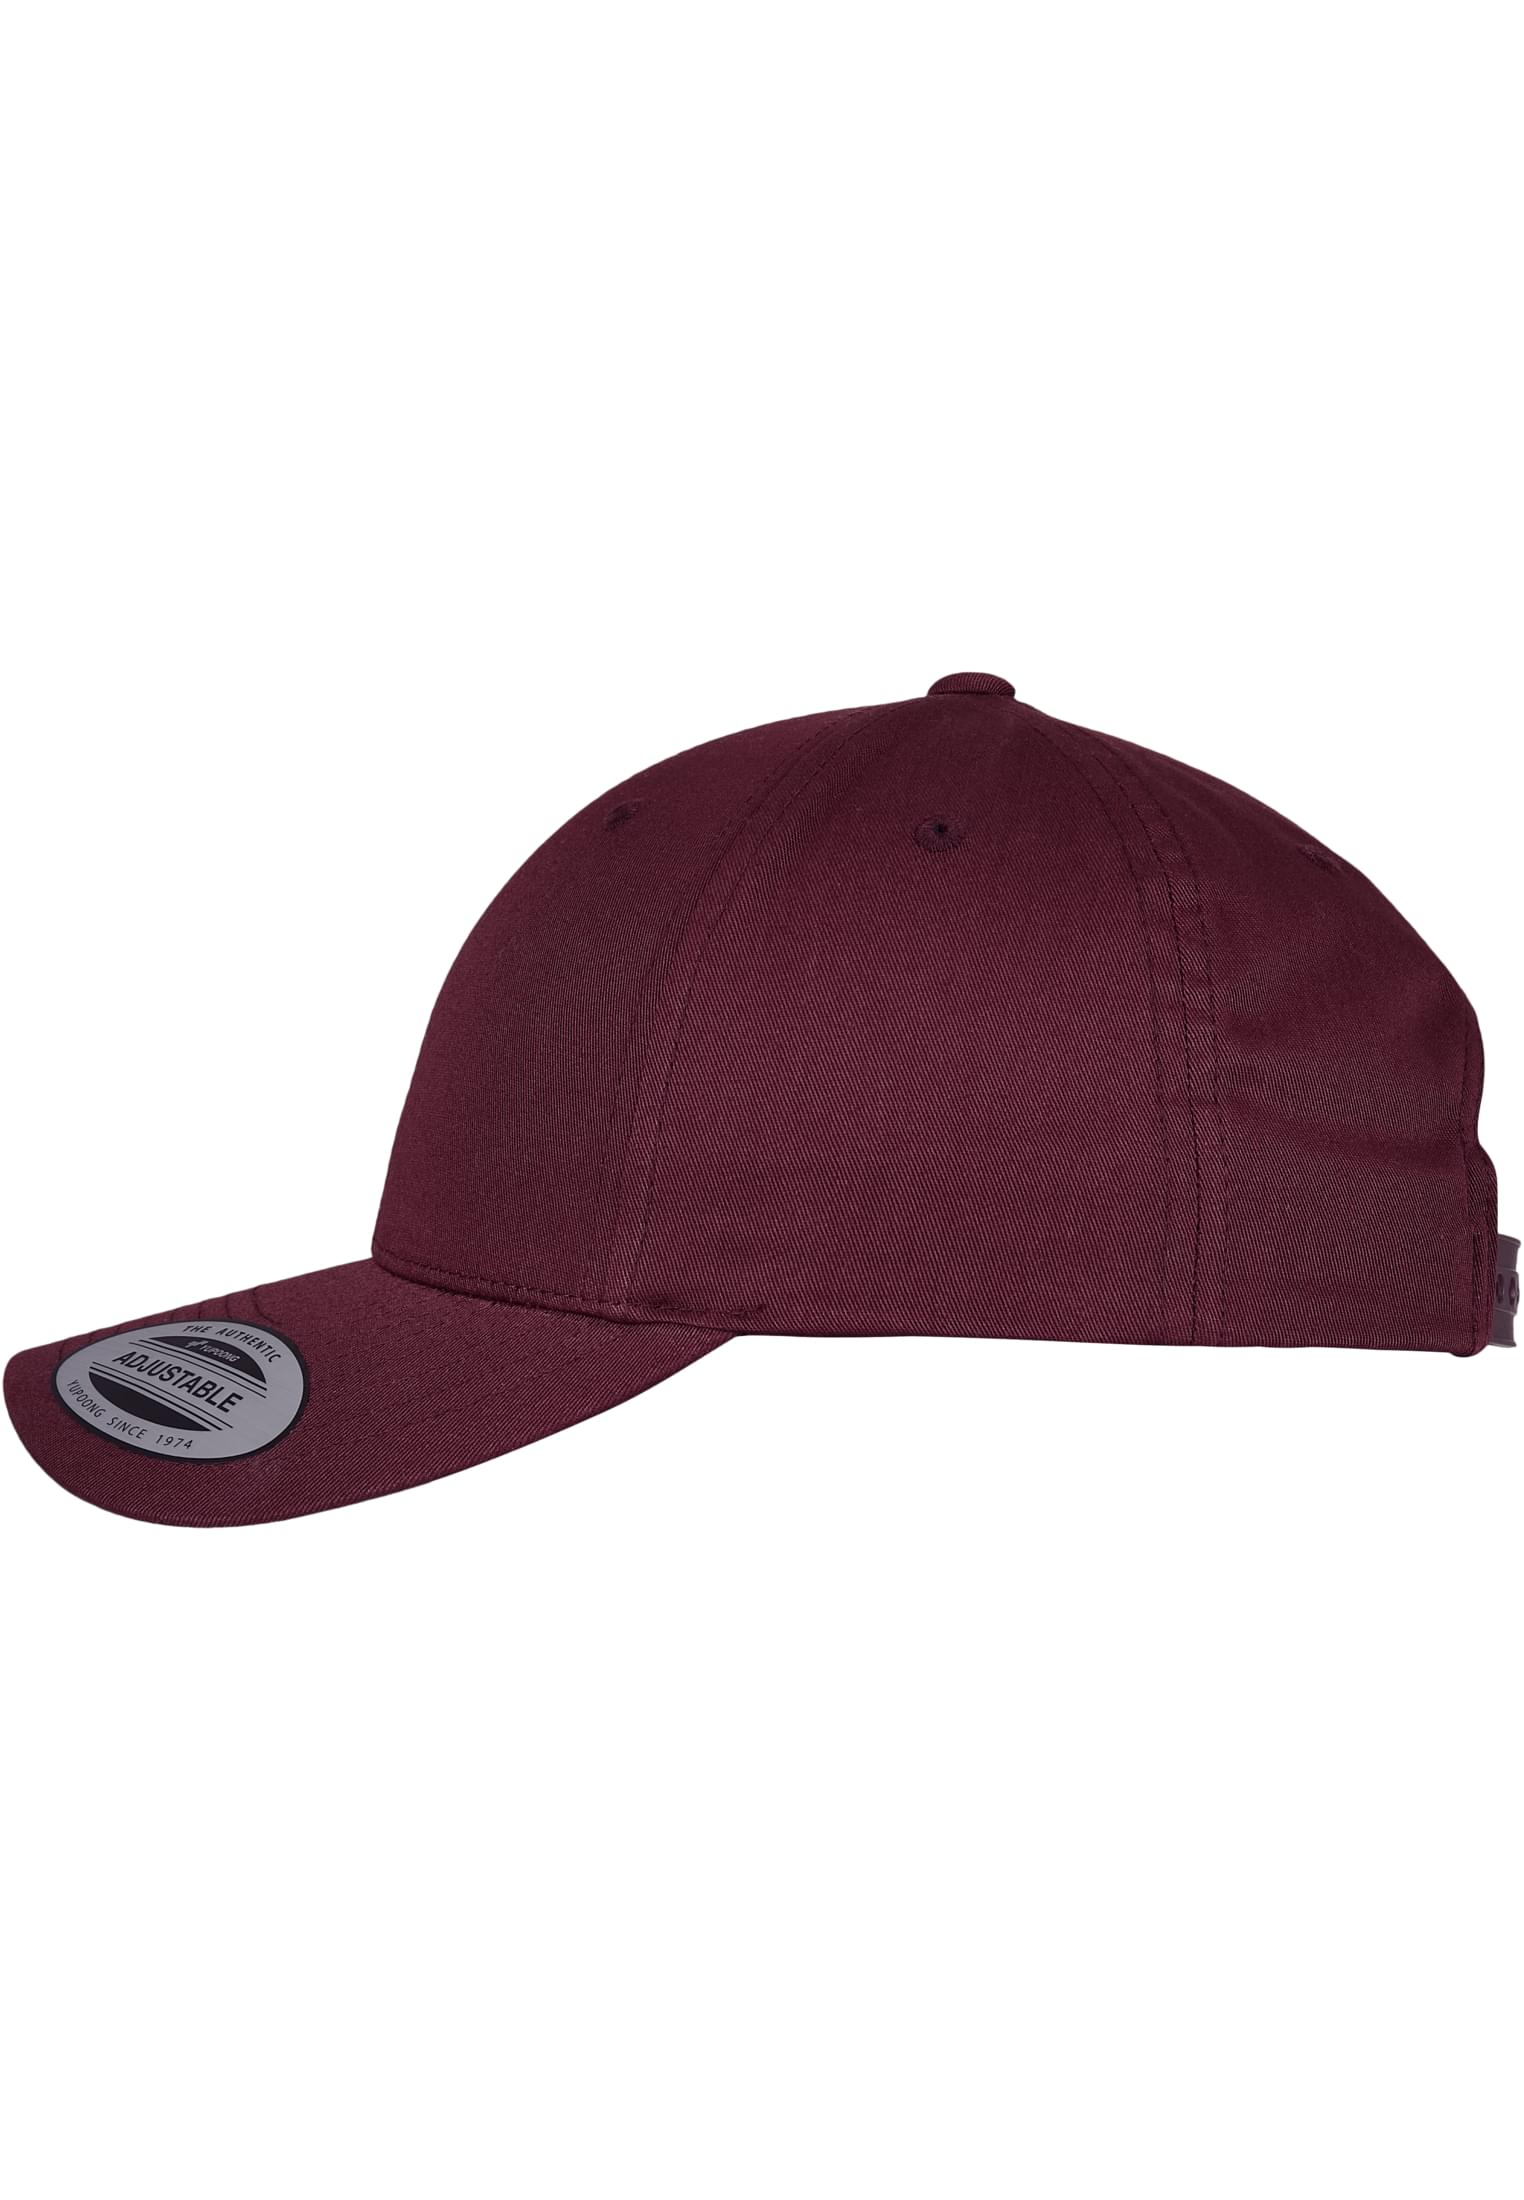 Snapback Curved Classic Snapback in Farbe maroon